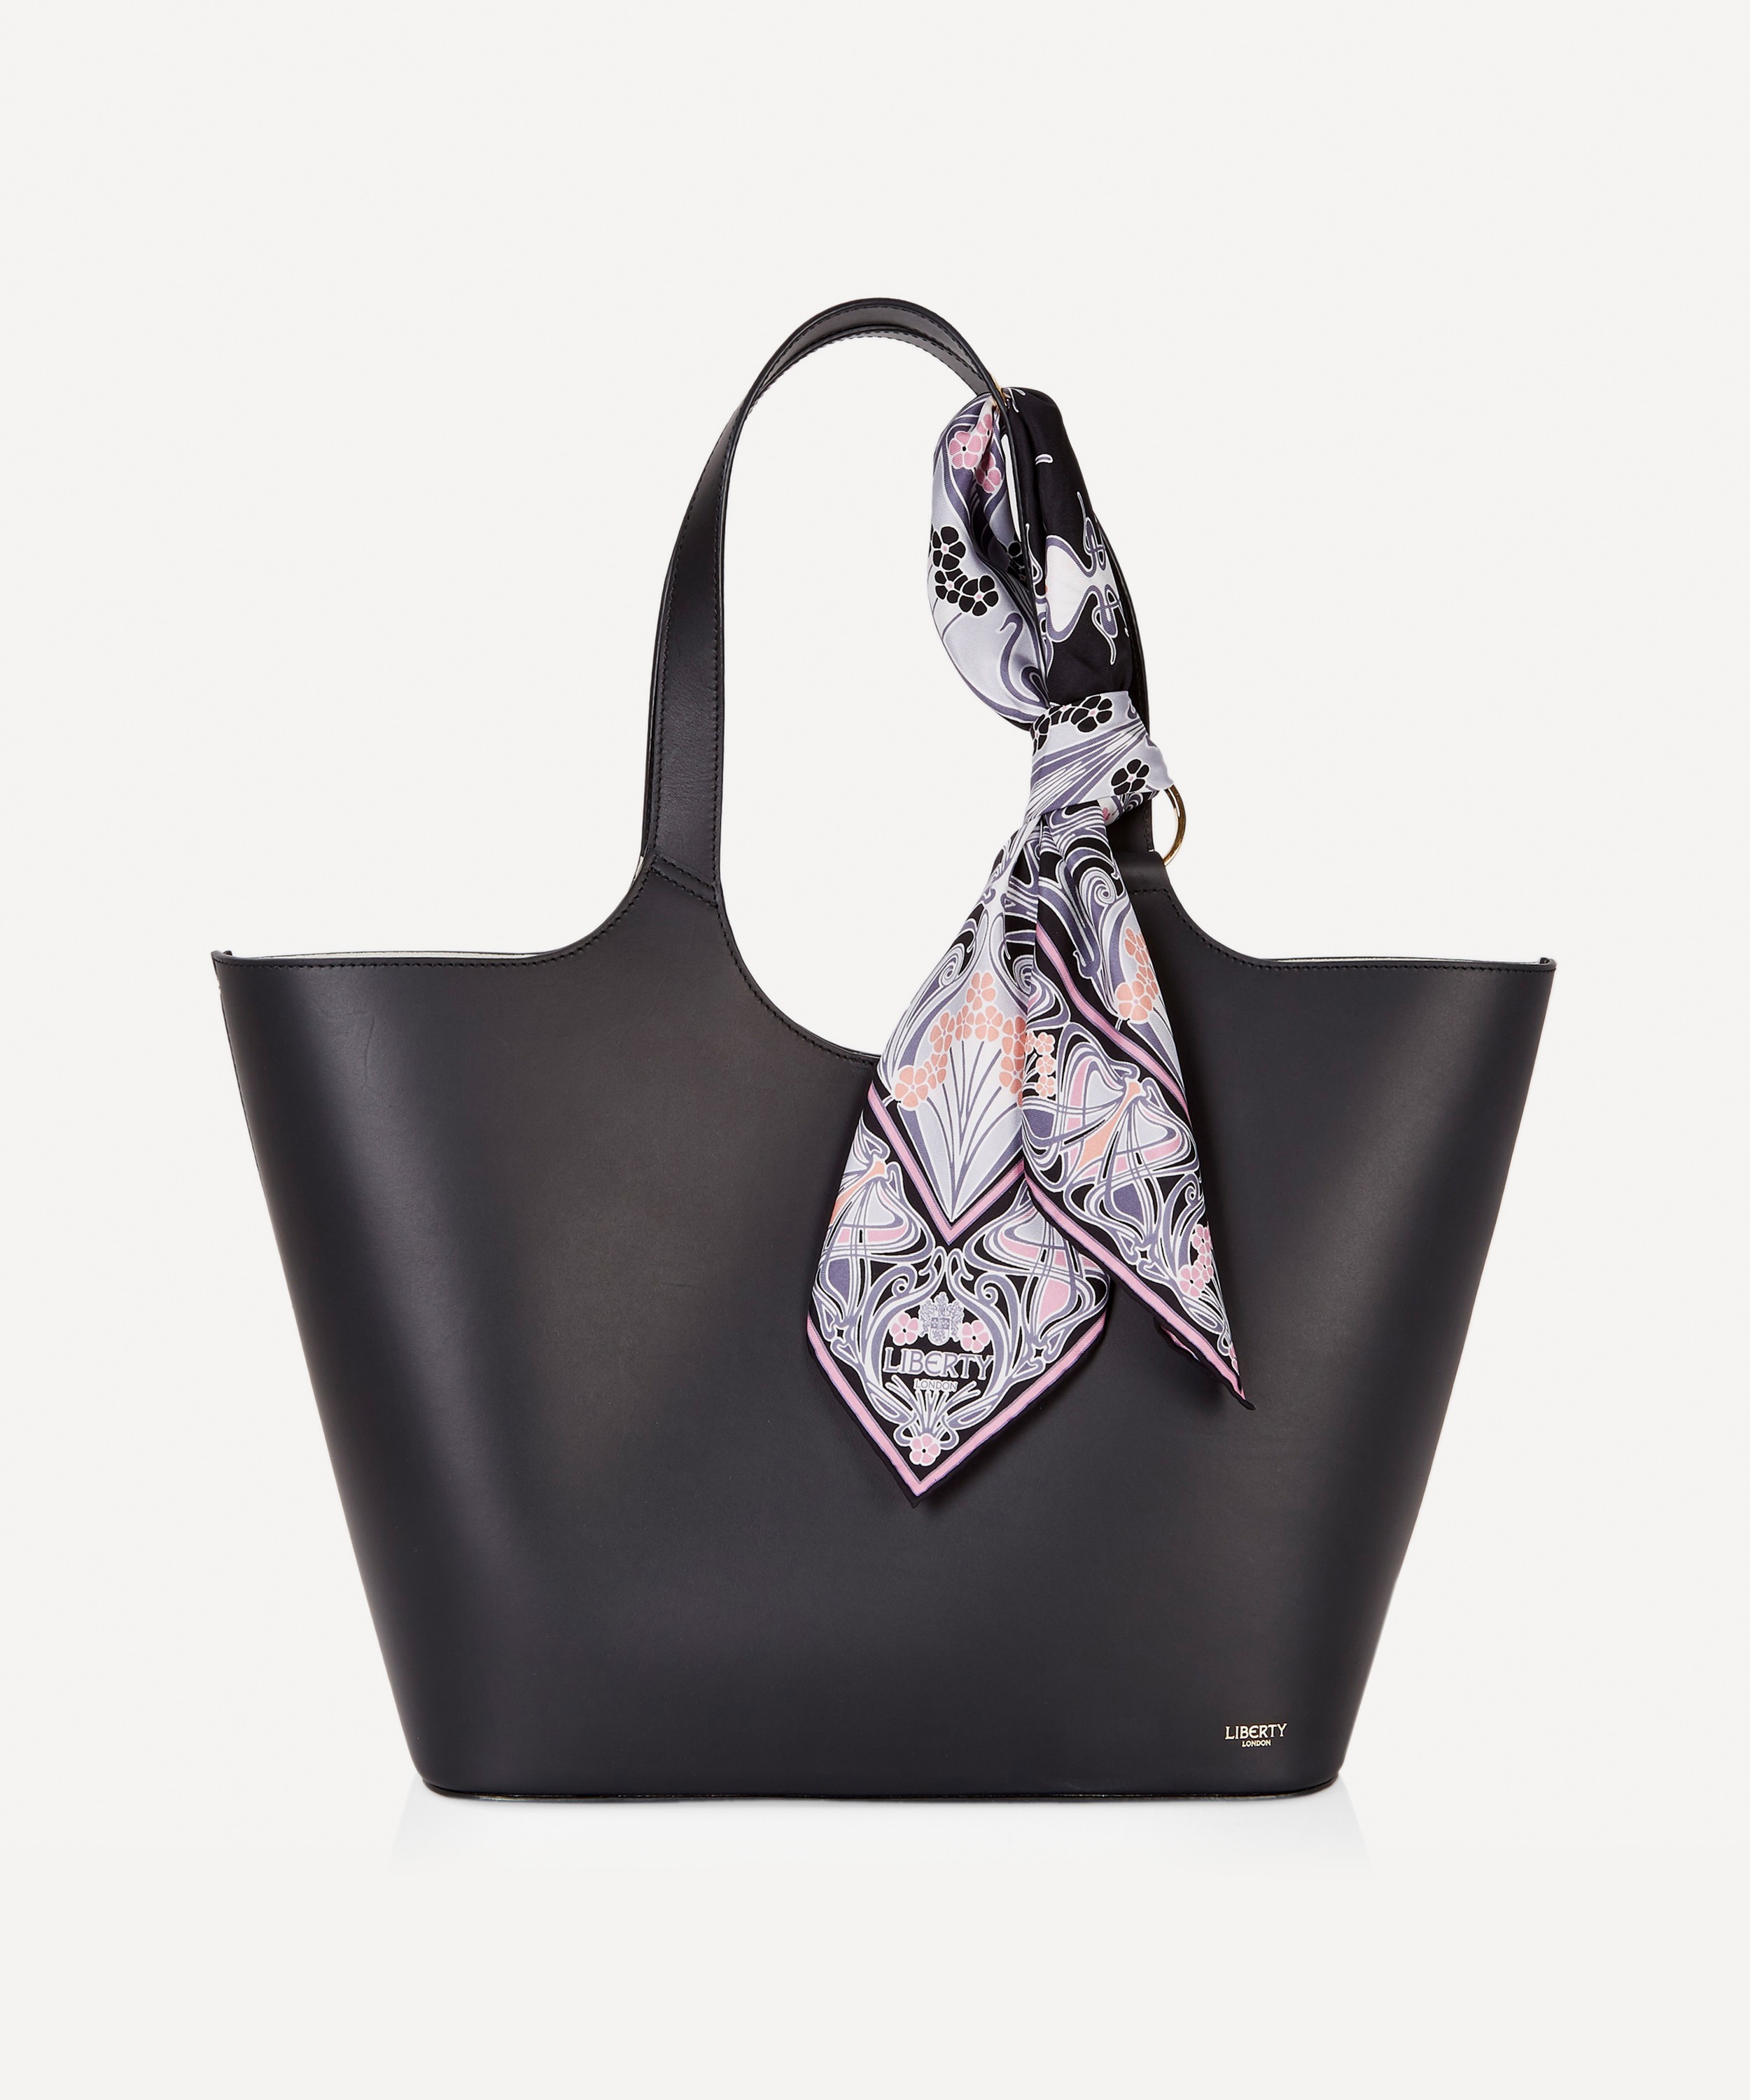 Liberty Audrey Leather Tote Bag with Ianthe Silk Scarf